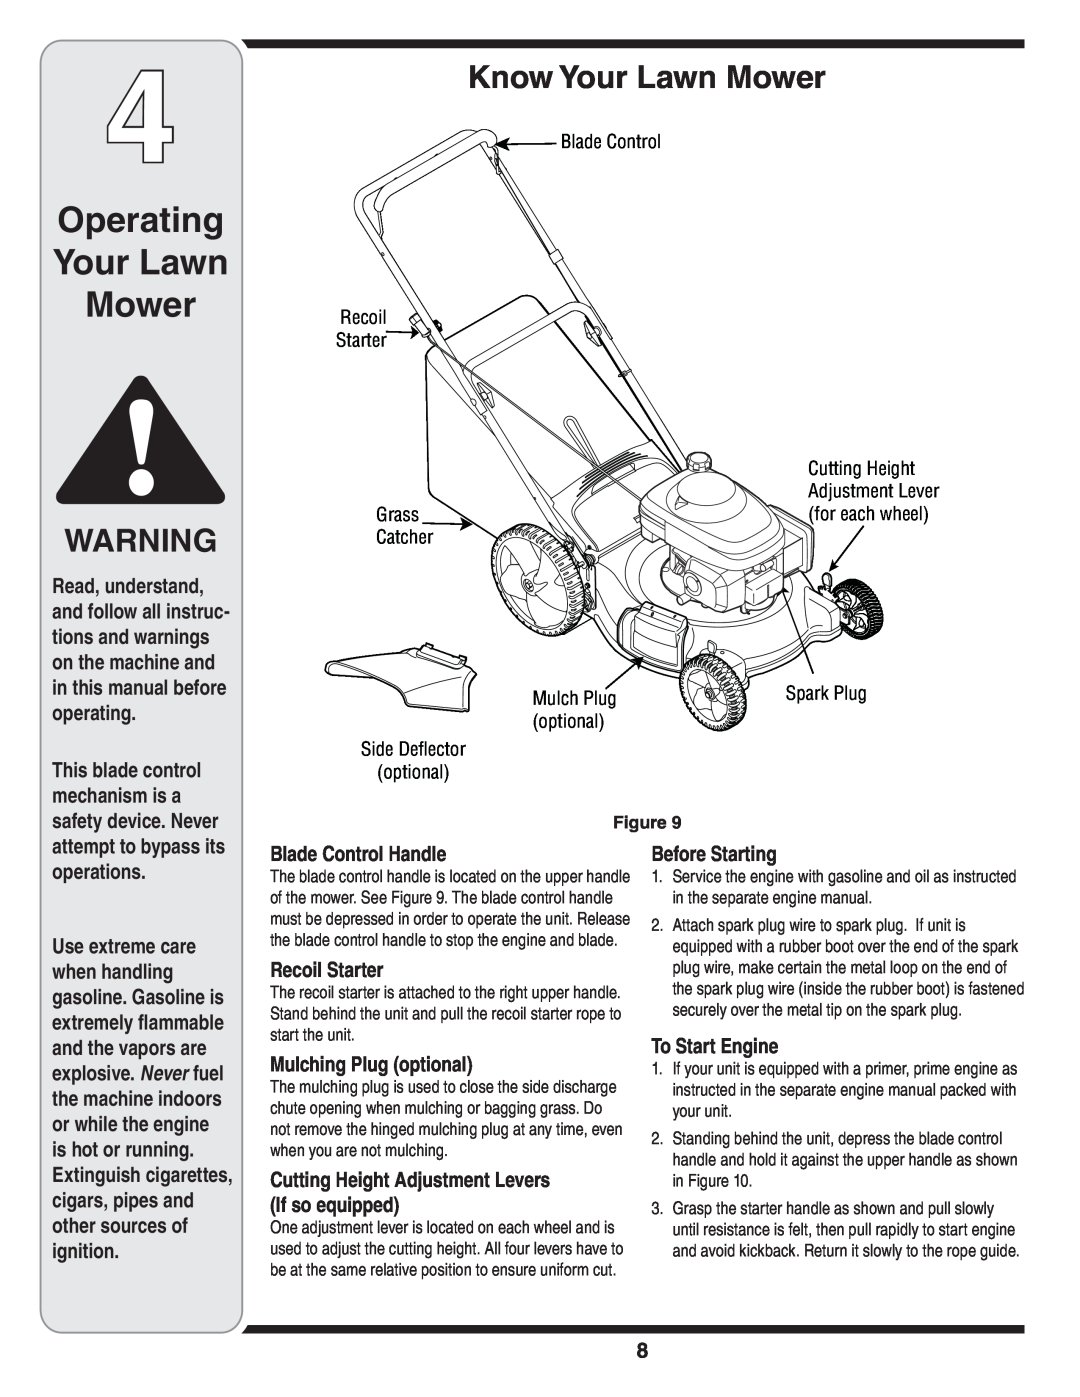 Columbian Home Products 540 warranty Operating Your Lawn Mower, Know Your Lawn Mower 